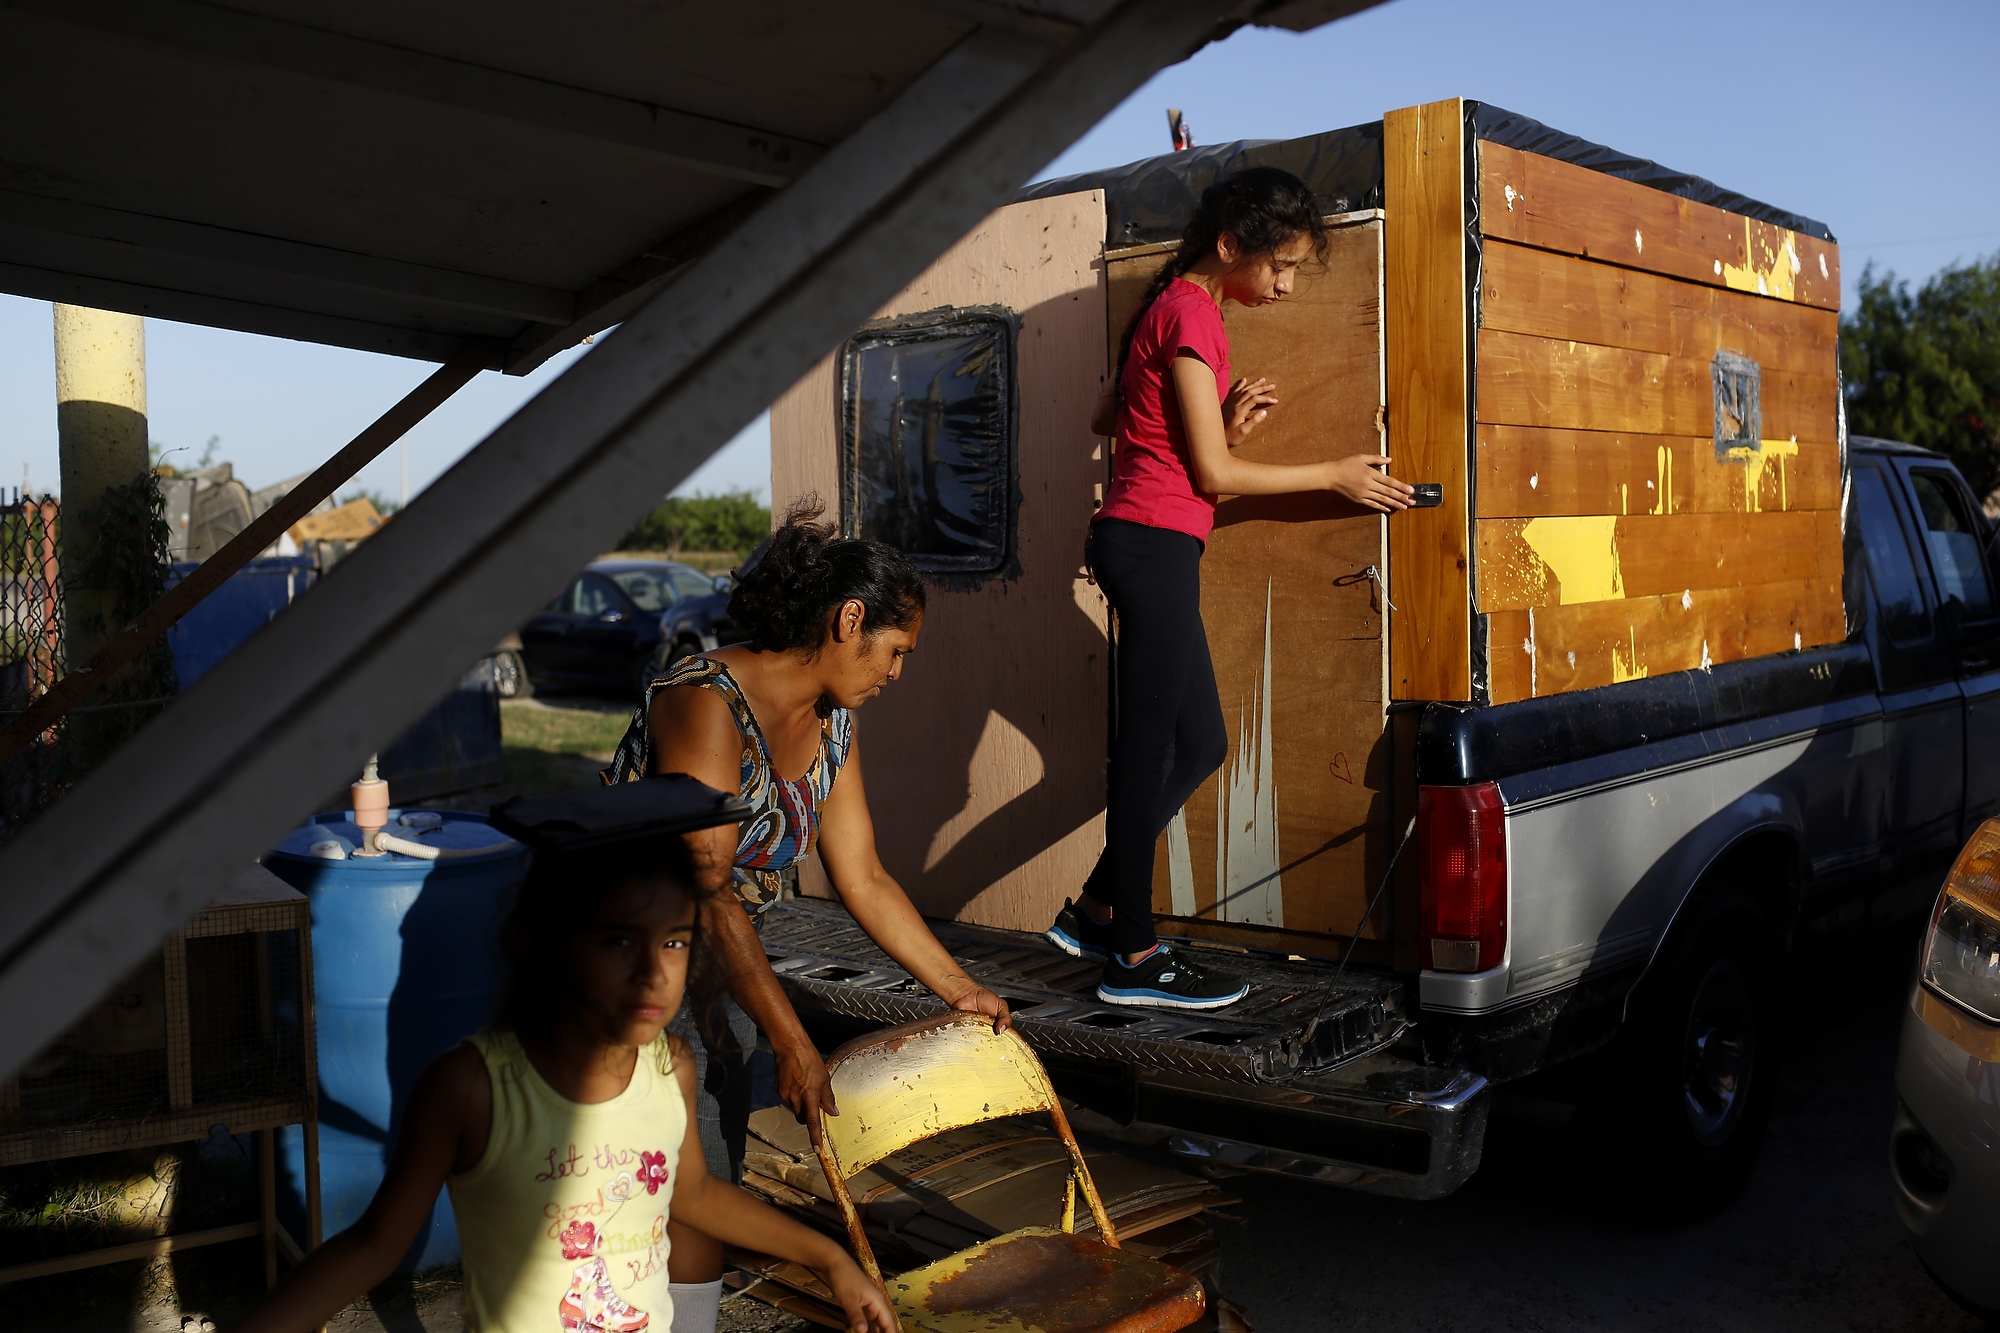 (Left to right) Jazlyn, Cynthia and Briana, who is leaving the sleeping compartment. The sleeping compartment is made from found materials and firework boxes. Cynthia, Nelson and Jazlyn sleep here, Hidalgo, Texas, July 1, 2014.